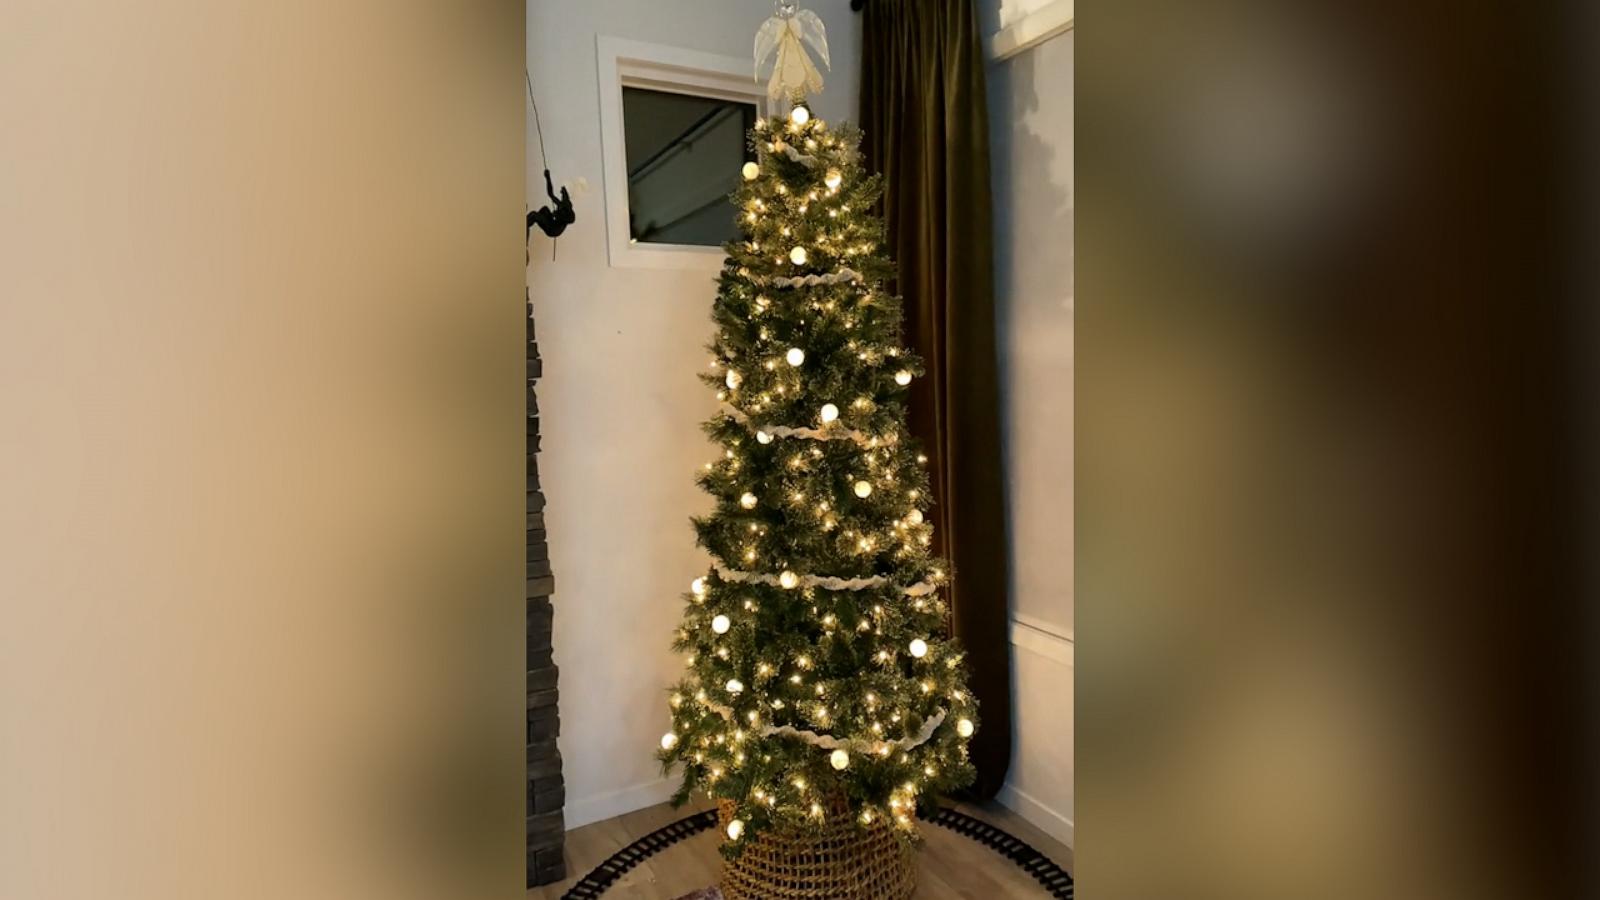 VIDEO: How you can brighten your Christmas tree using ping pong balls